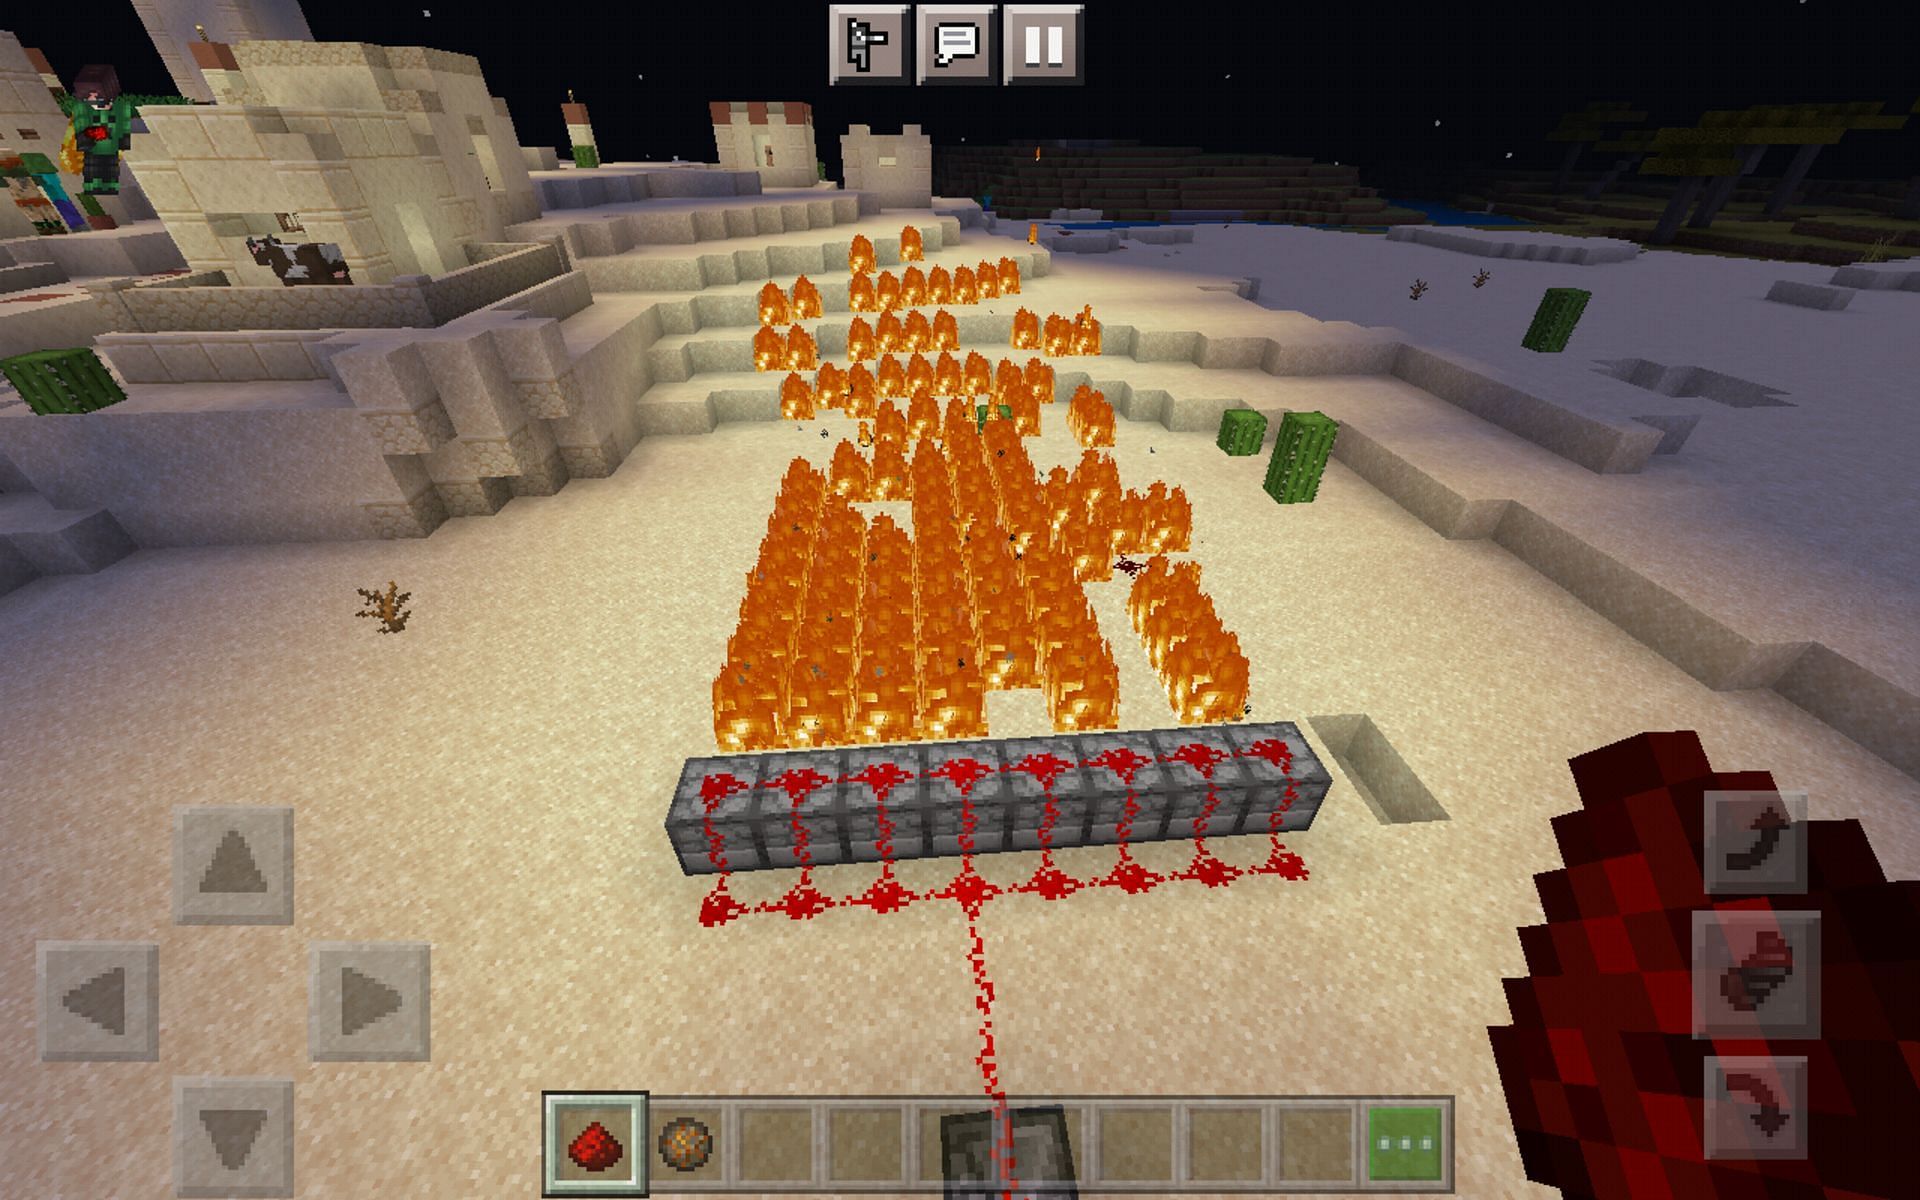 A player-made flame cannon using fire charges (Image via Reddit user Ggknight33828)